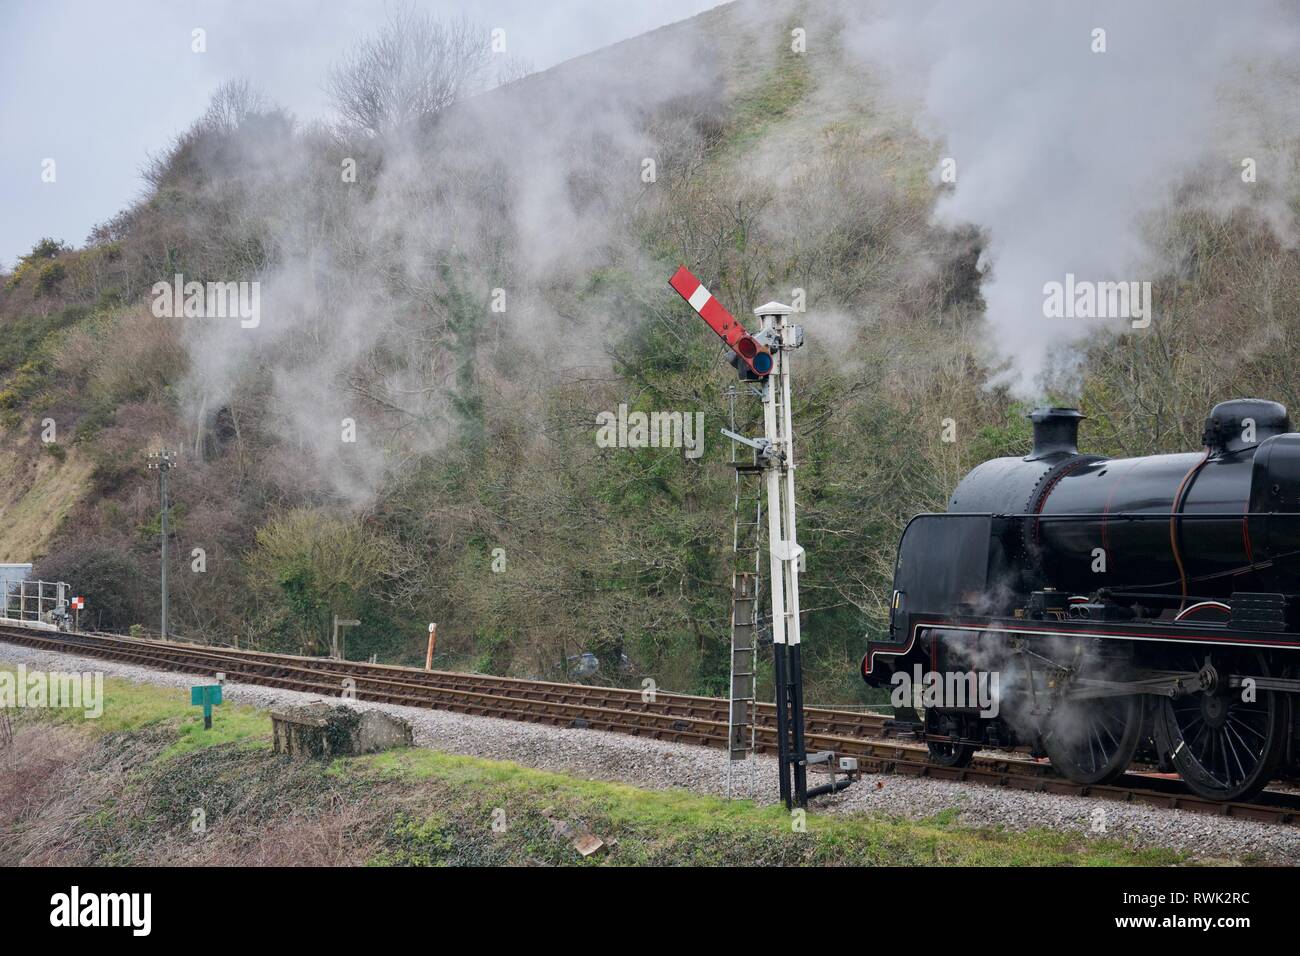 A traditional black steam train steaming along a wooded track (railway line) beneath a hill. Red signal post set to go and grey steam / smoke above th Stock Photo